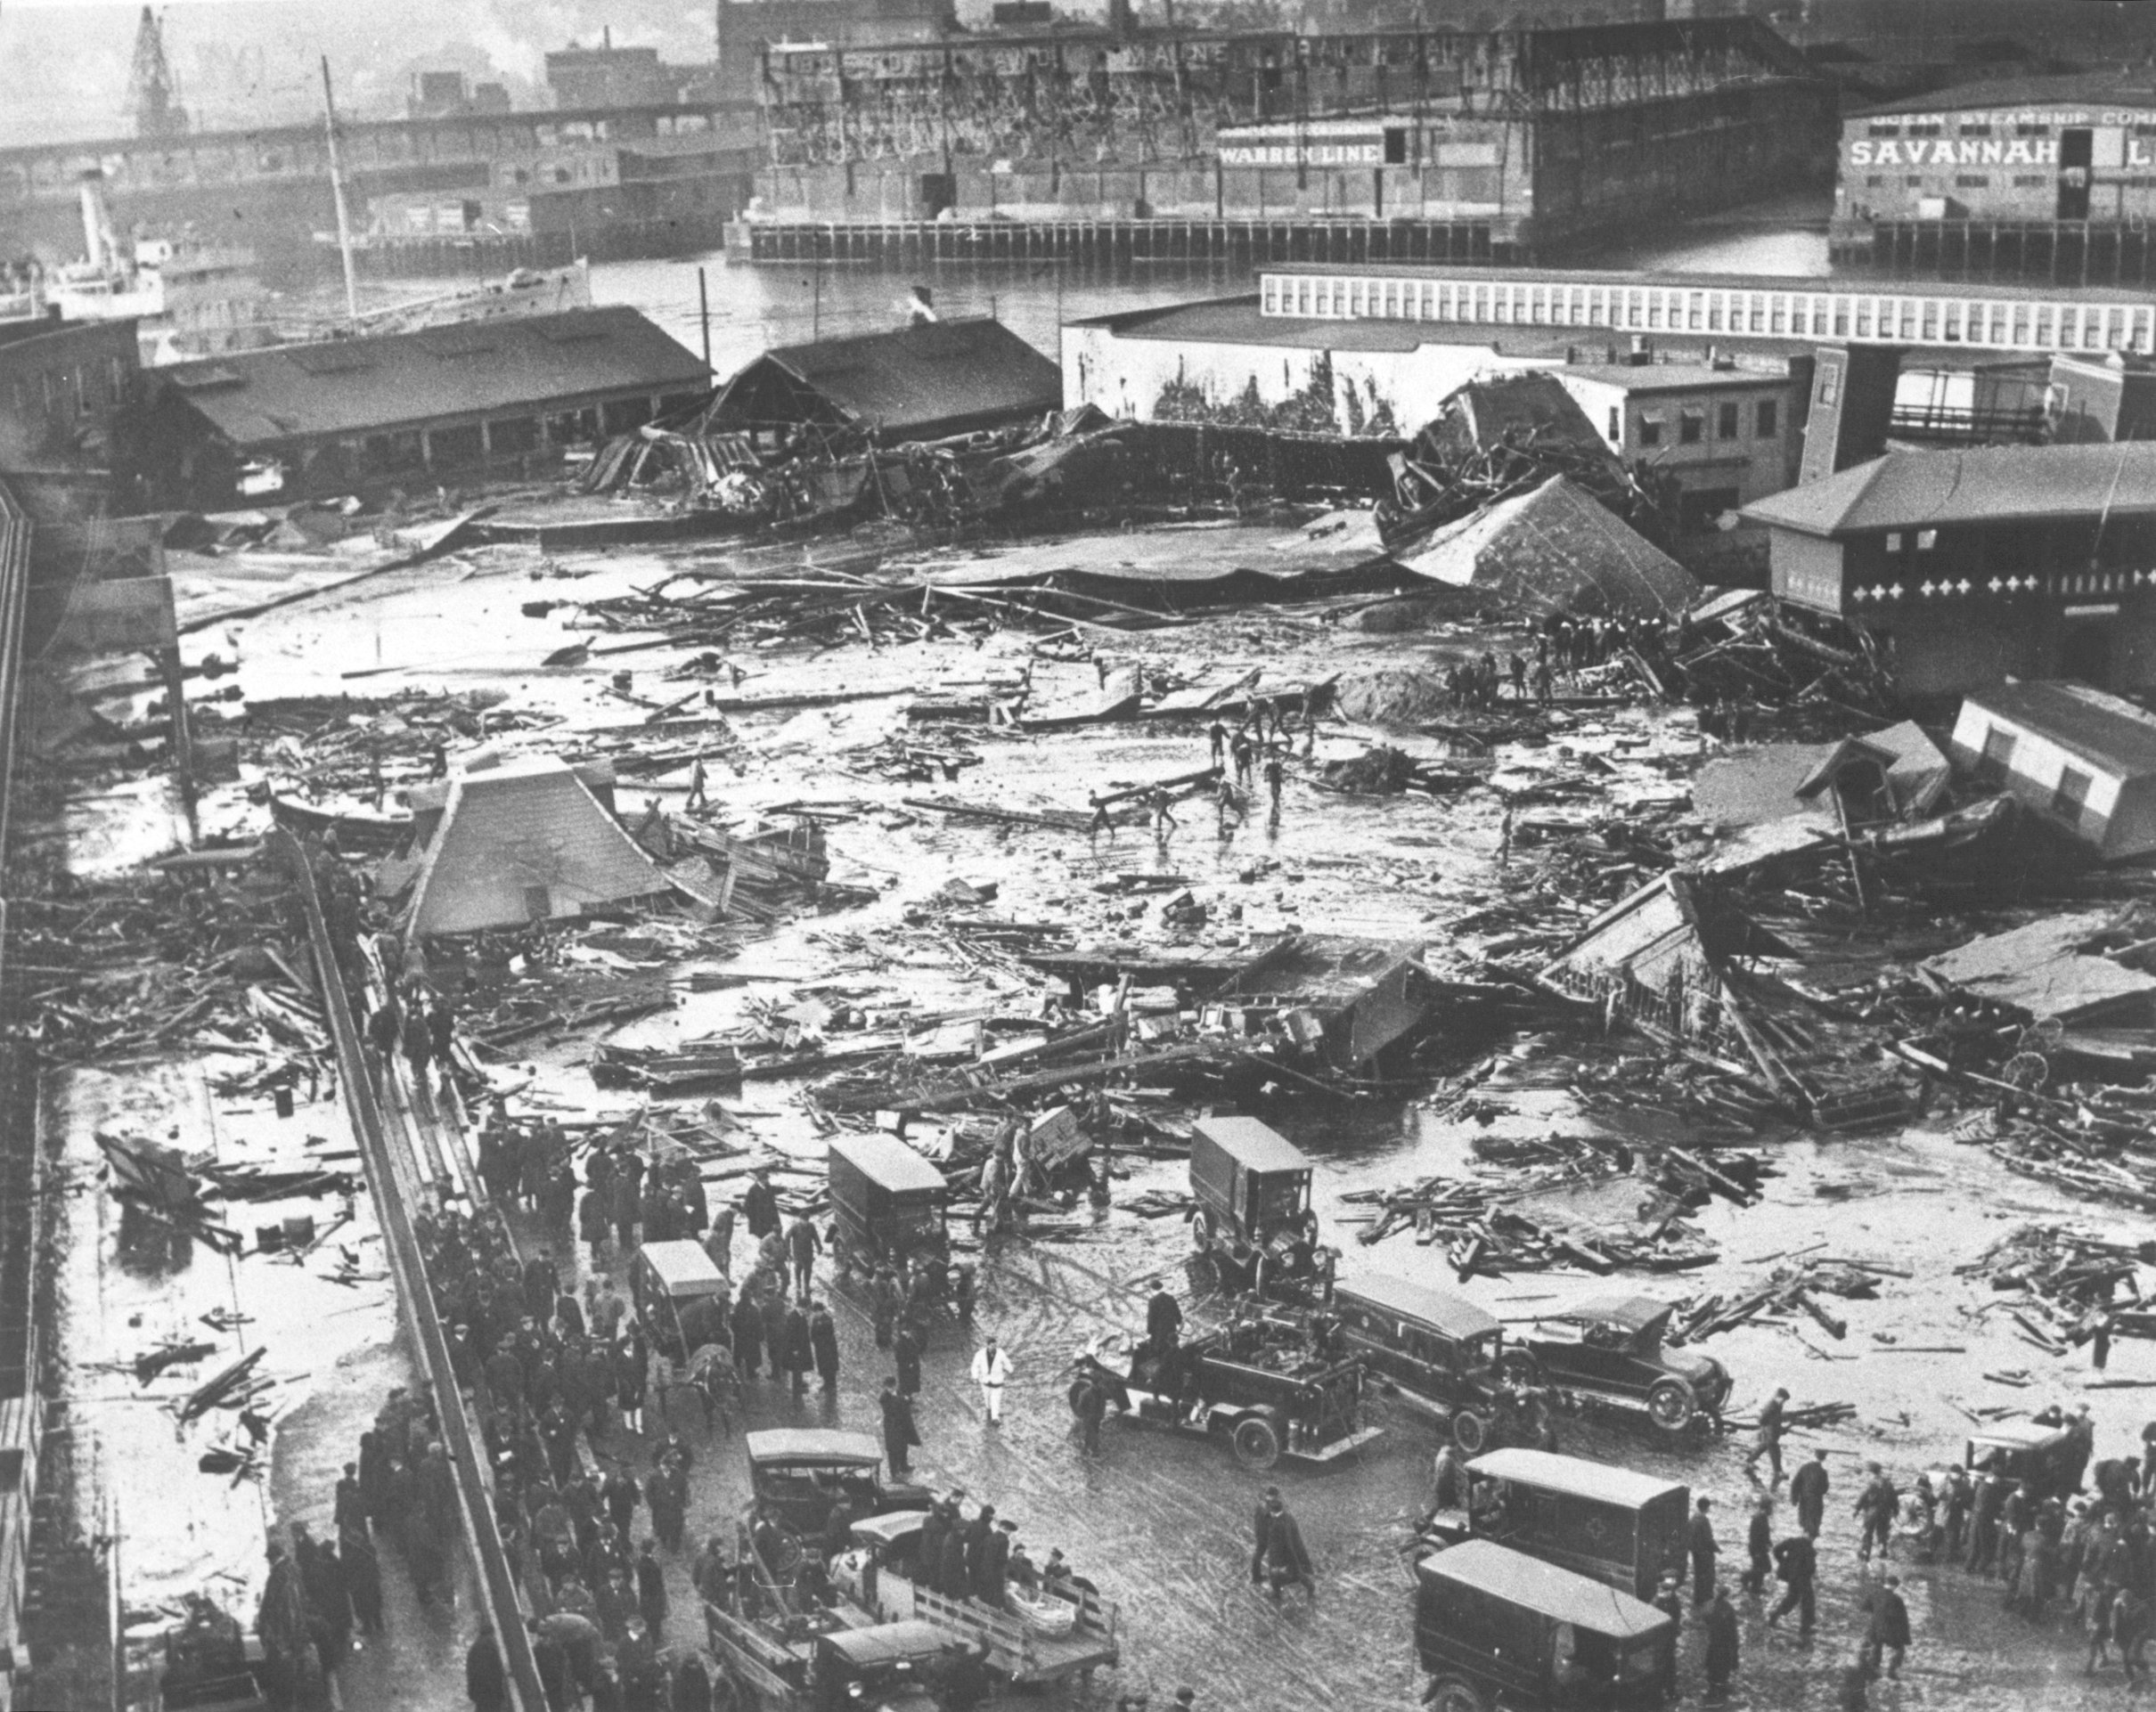 A molasses tank collapsed and caused widespread damage in Boston's North End in January 1919. The incident is commonly referred to as the Great Molasses Flood. (Boston Globe via Getty Images)